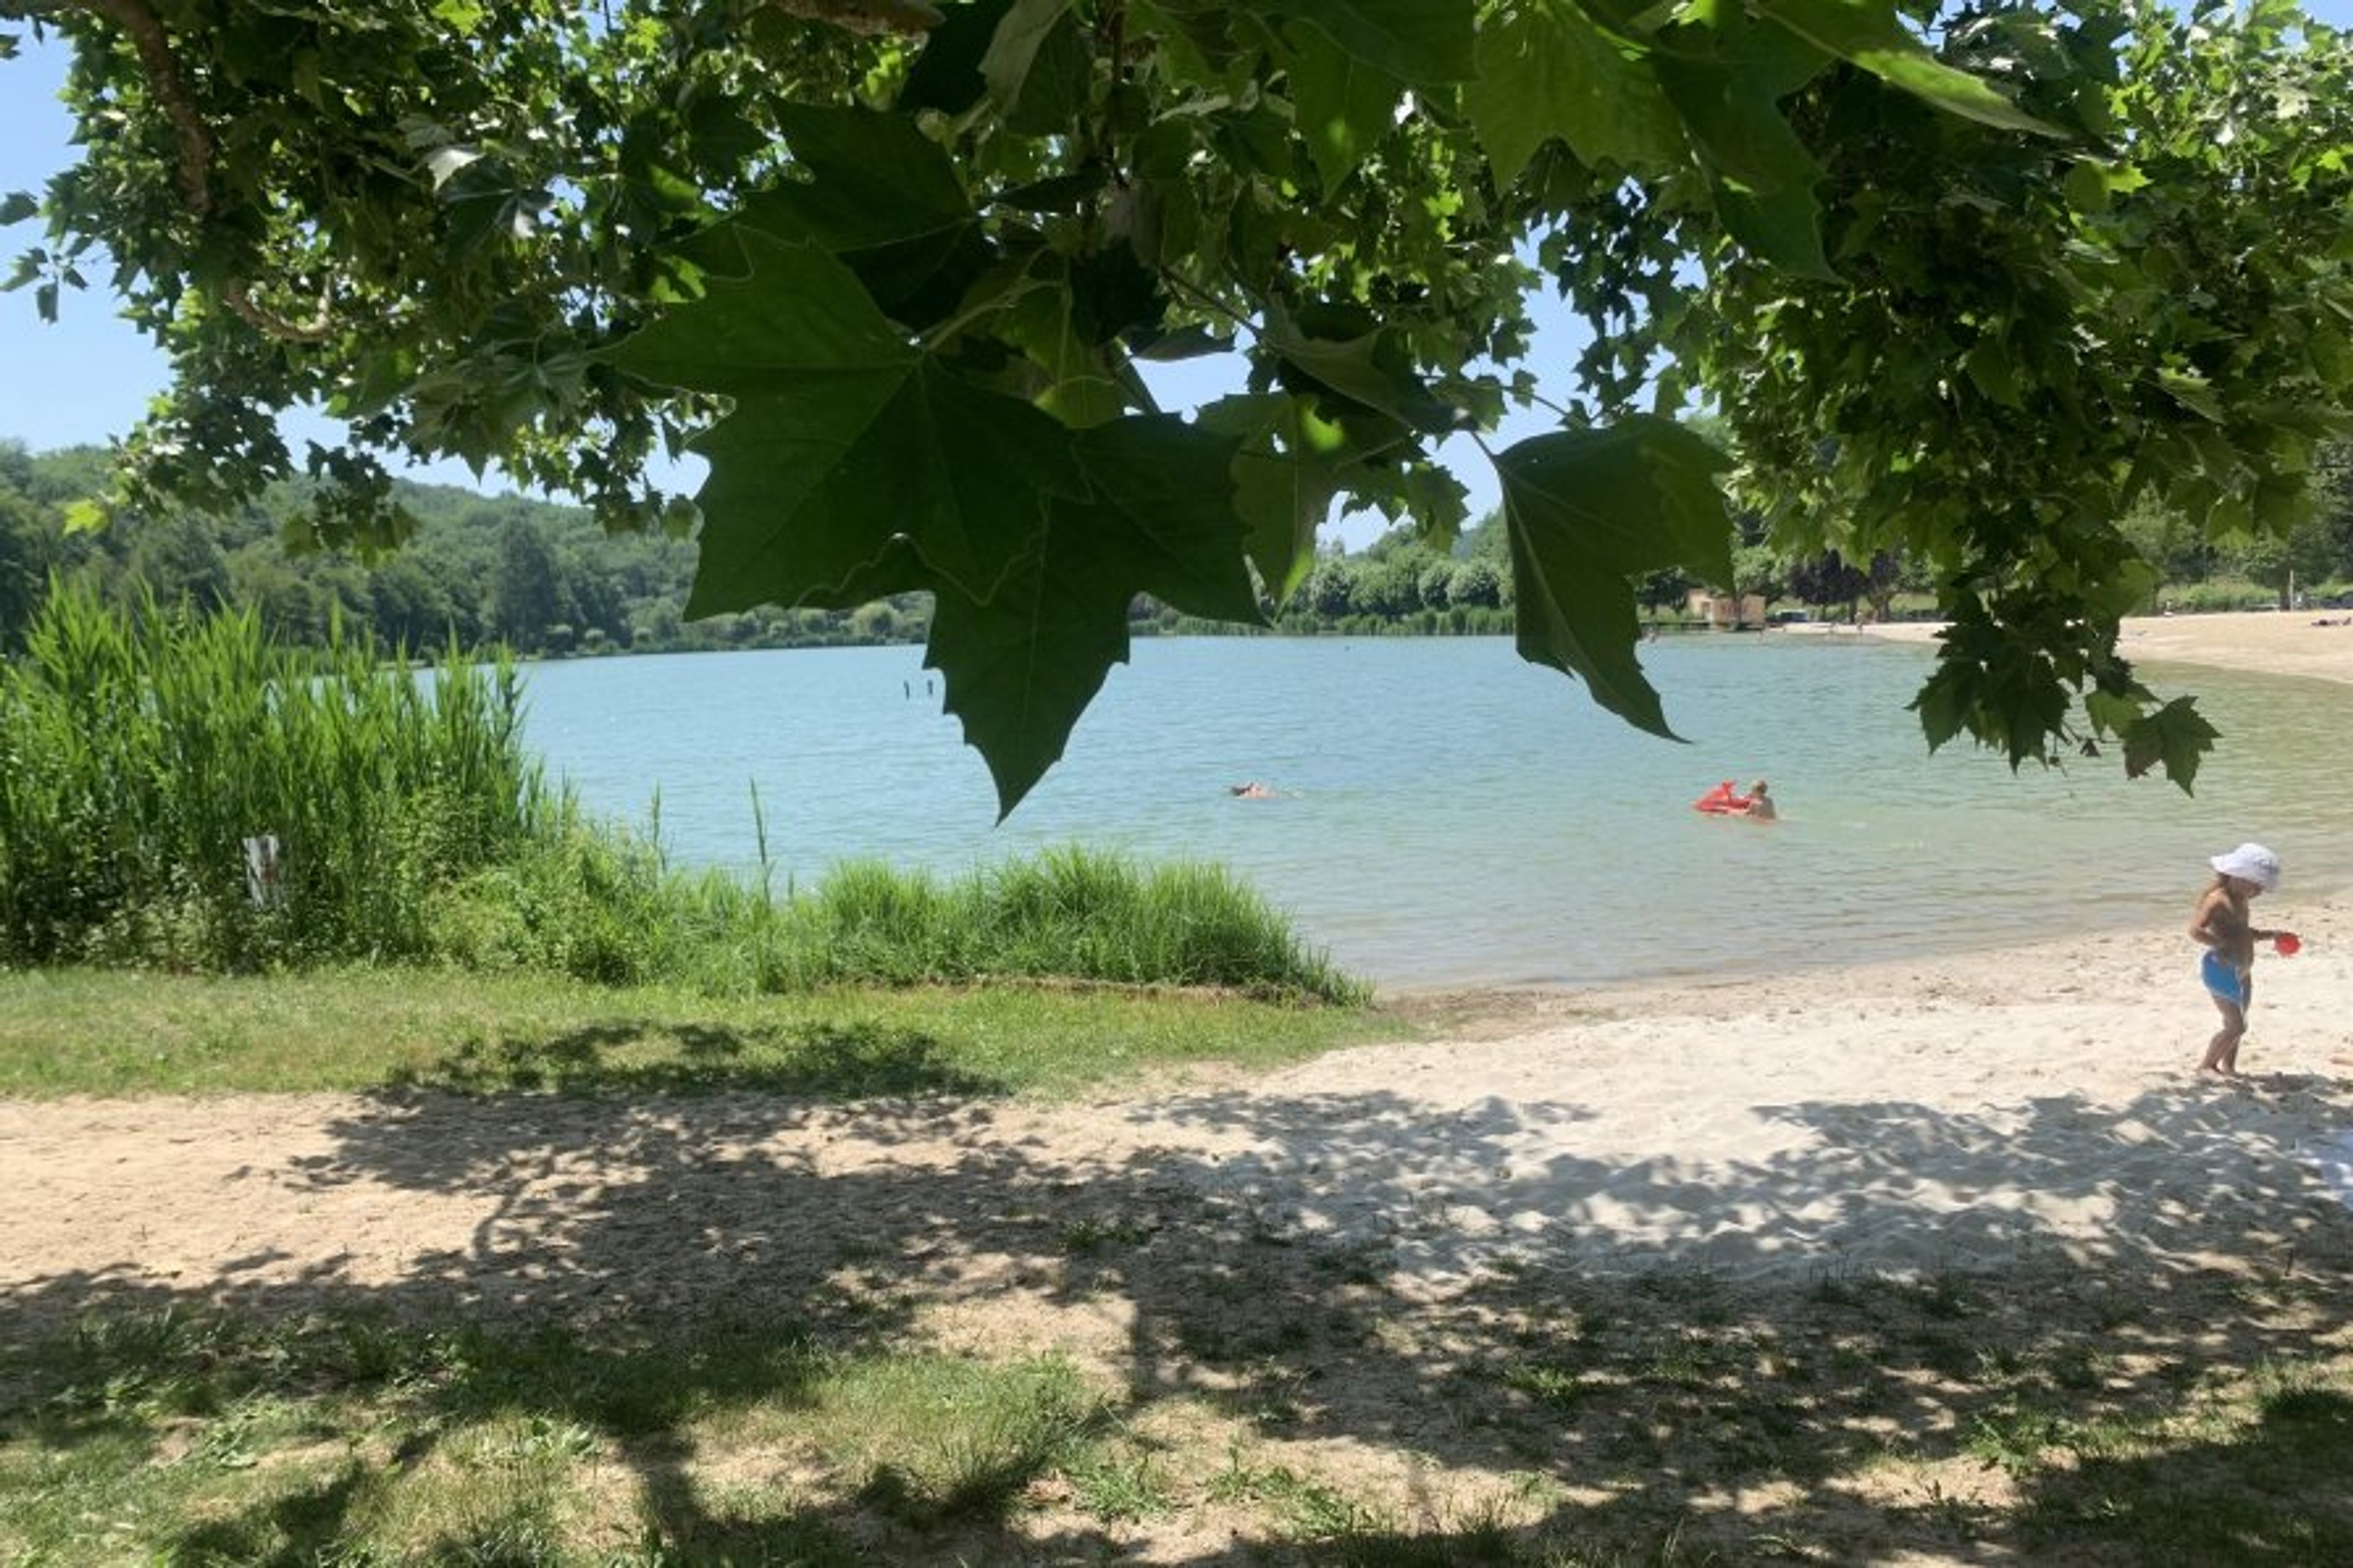 The nearby lake where you can chill, swim serious lengths or play.